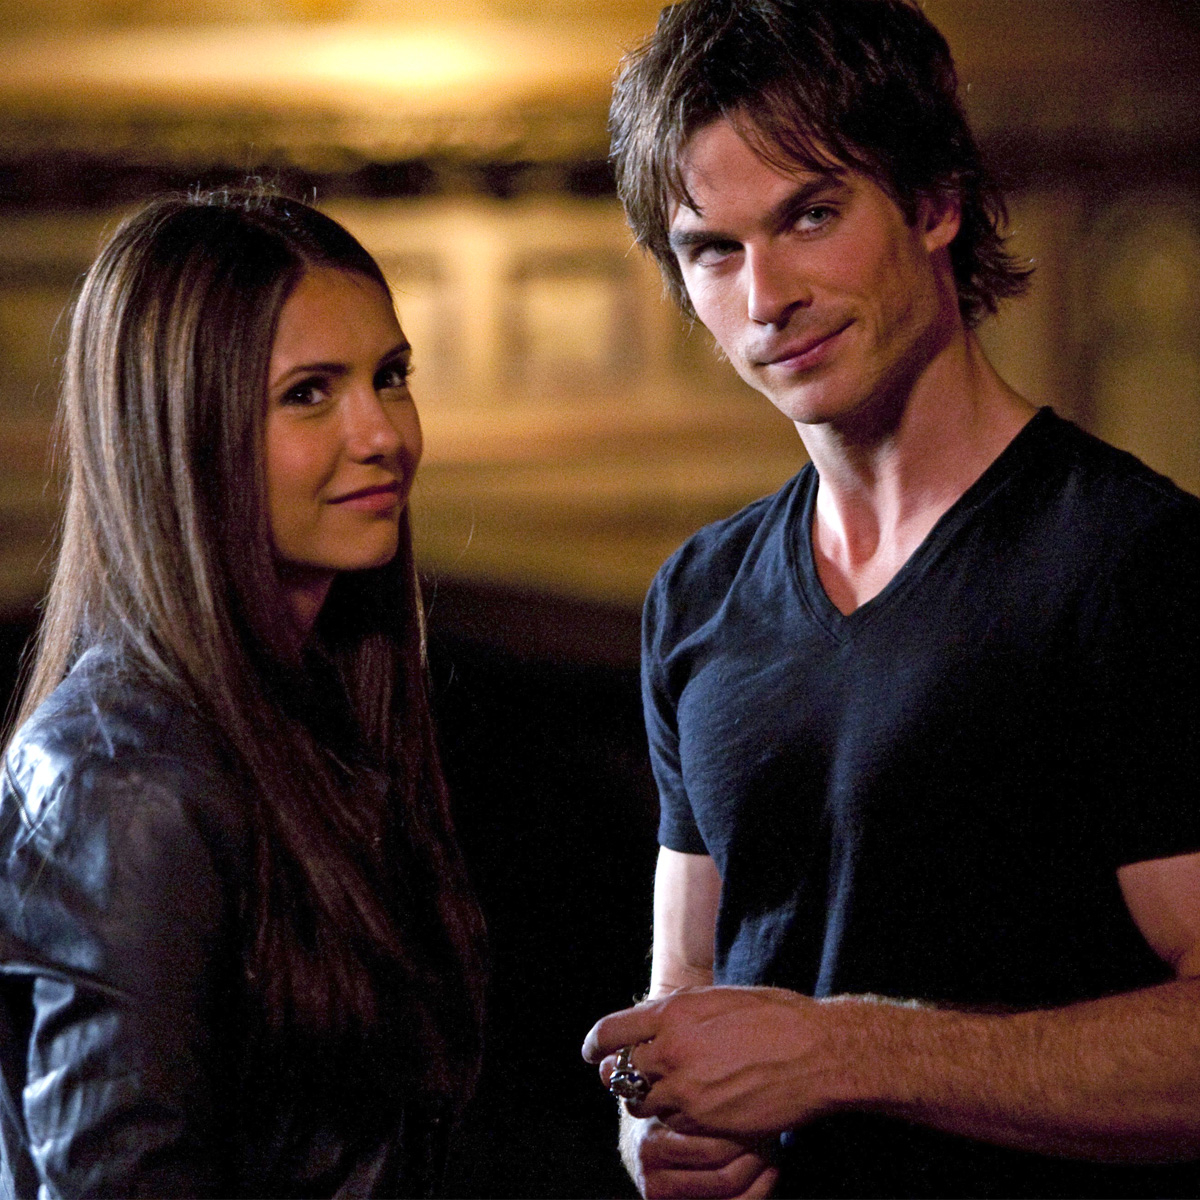 The Vampire Diaries Franchise Has Come to a Close